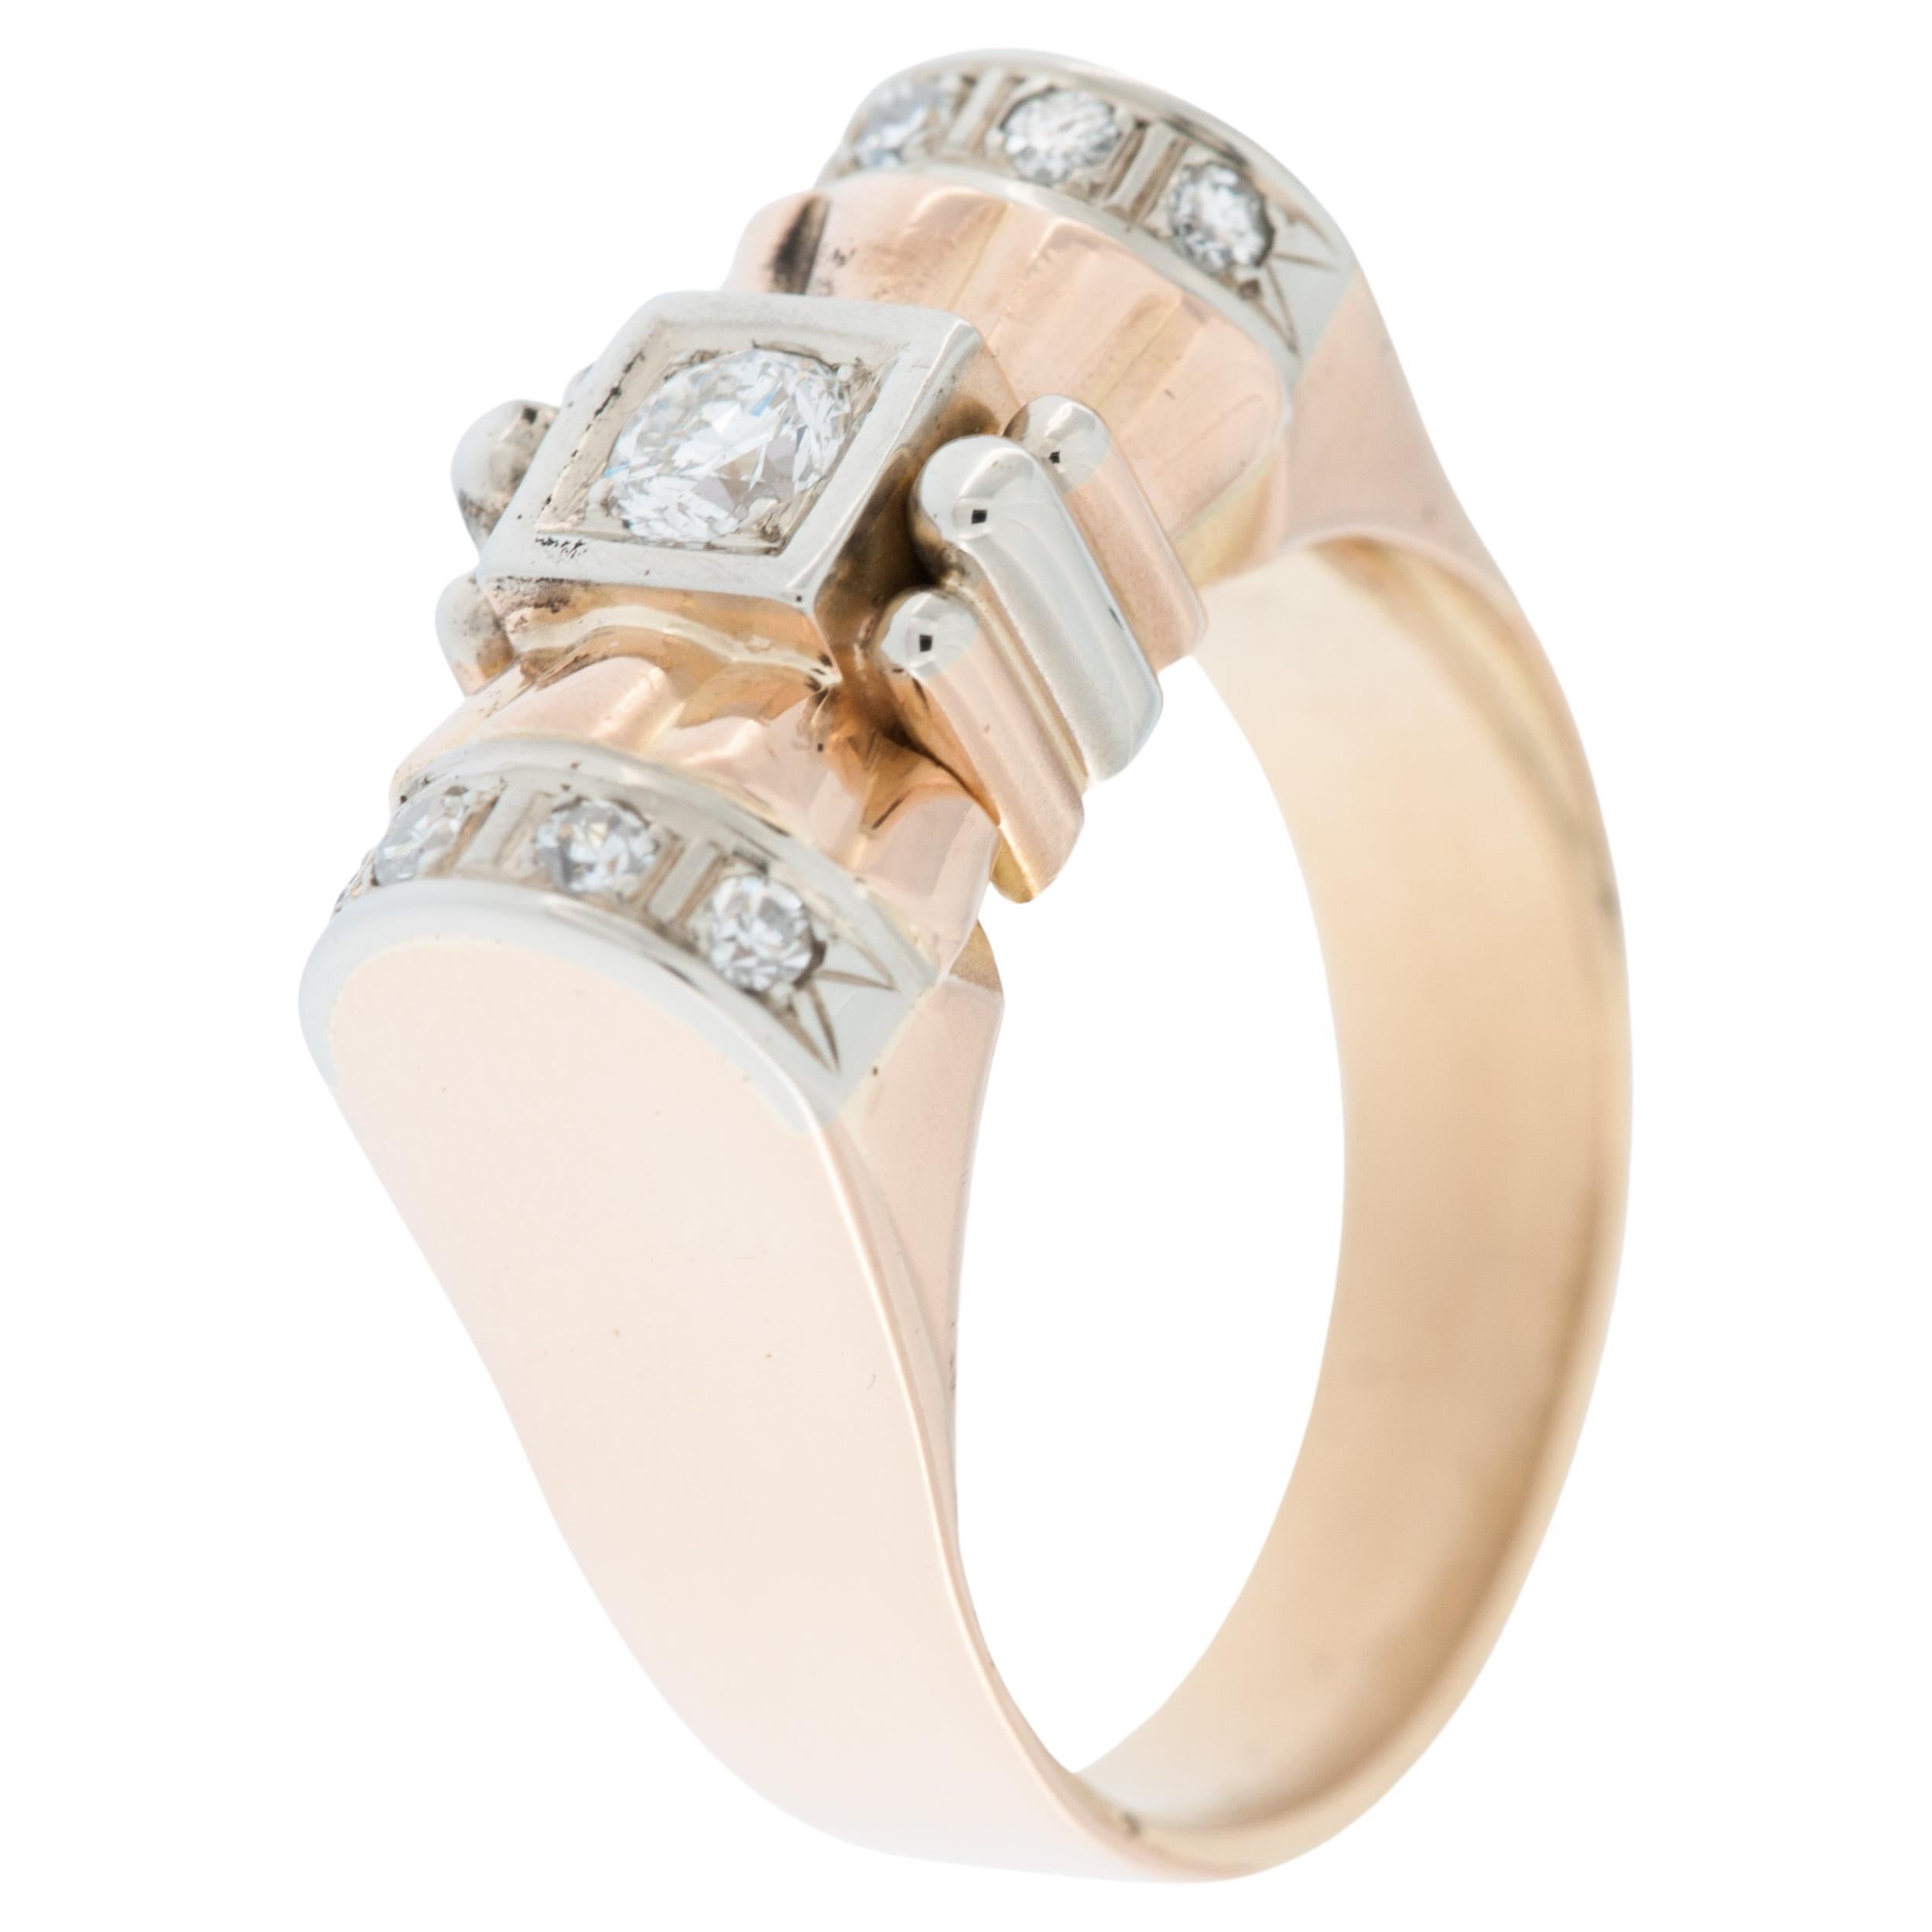 Art Deco 18 karat Yellow and White Gold Hand-Chiselled Ring with Diamonds